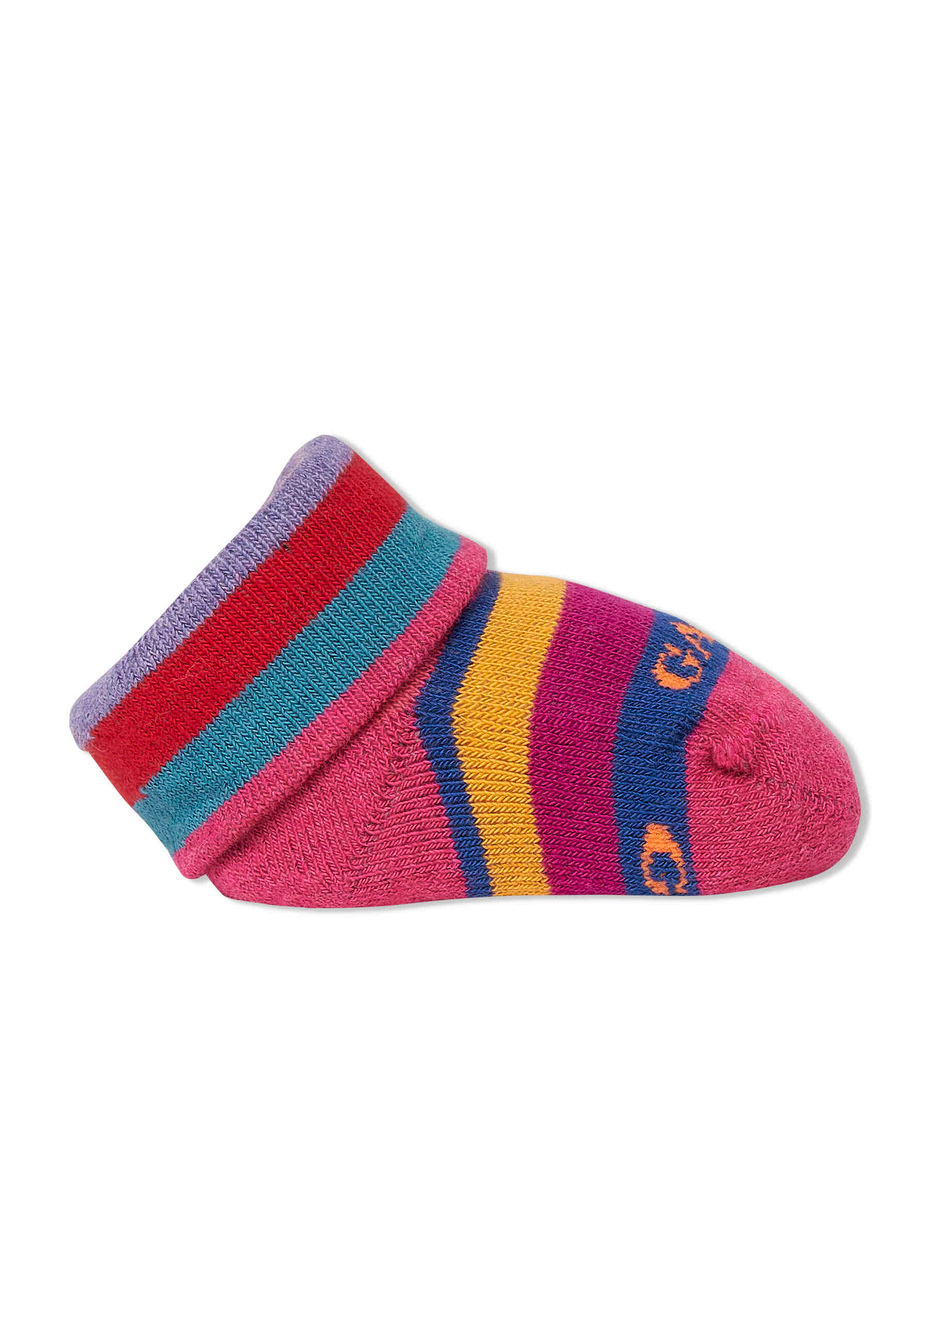 Kids' erica cotton booties with multicoloured stripes - Gallo 1927 - Official Online Shop